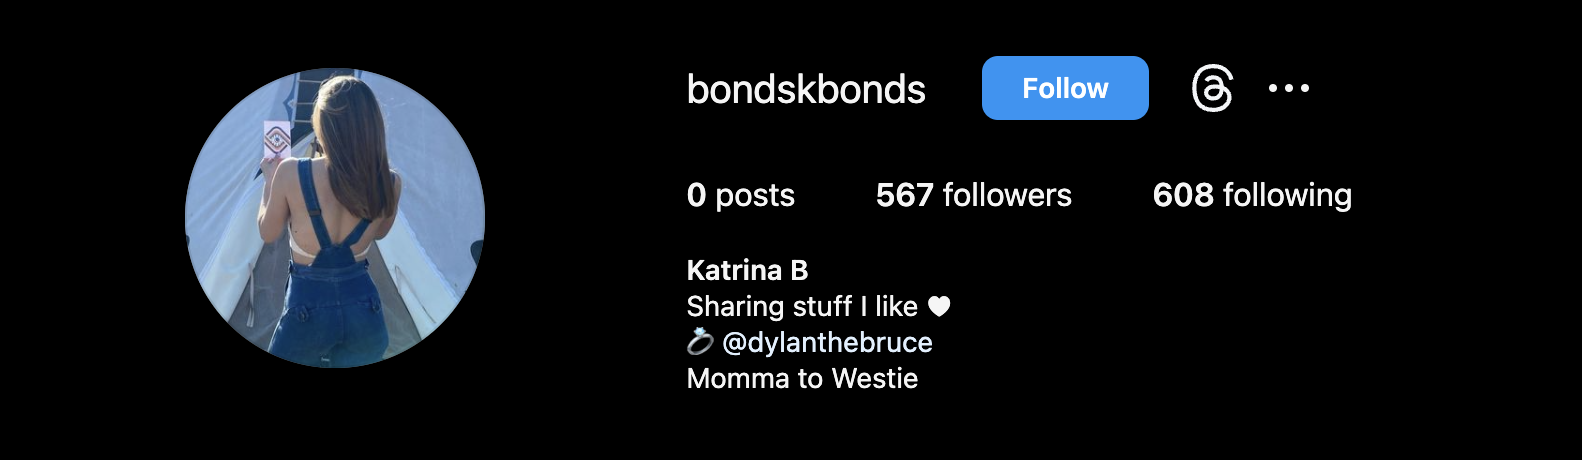 Katrina Bonds’s Instagram bio hints at her being Dylan Bruce’s wife.